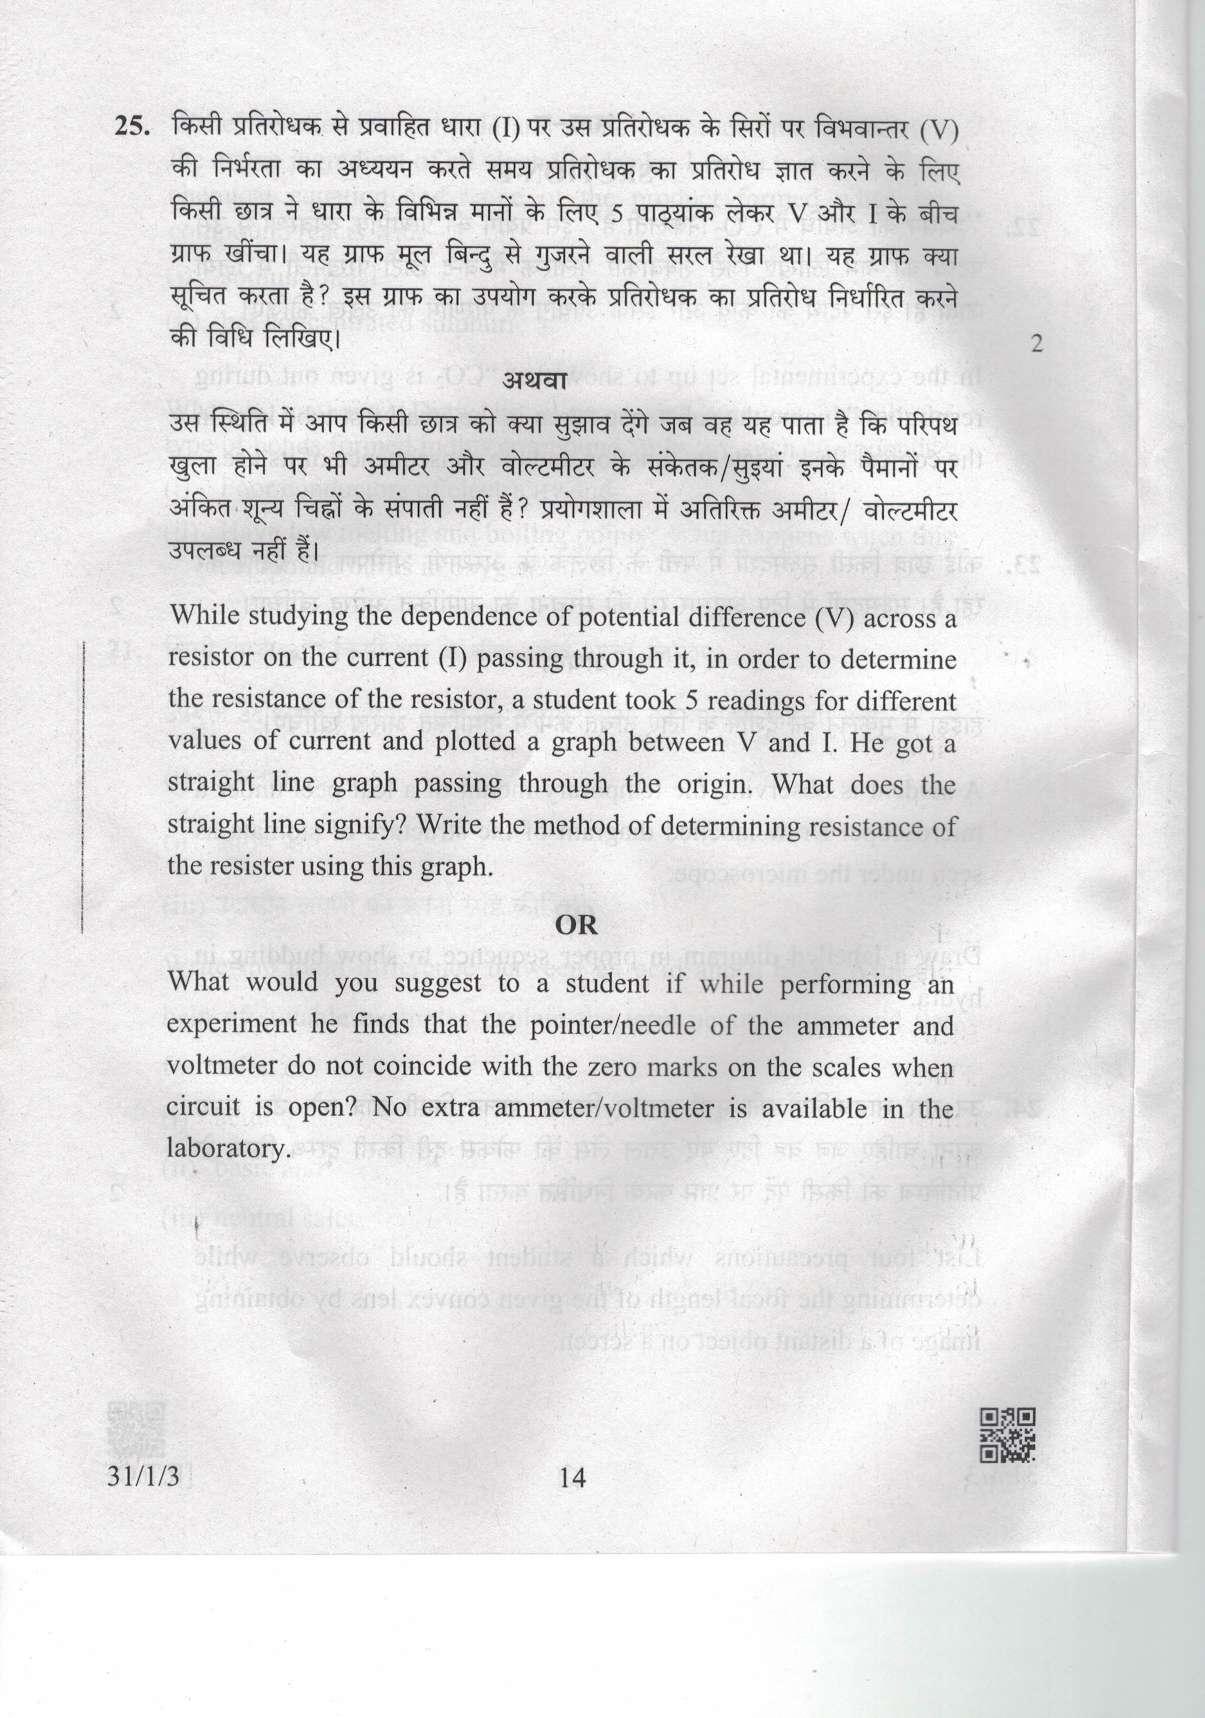 CBSE Class 10 31-1-3 Science 2019 Question Paper - Page 14